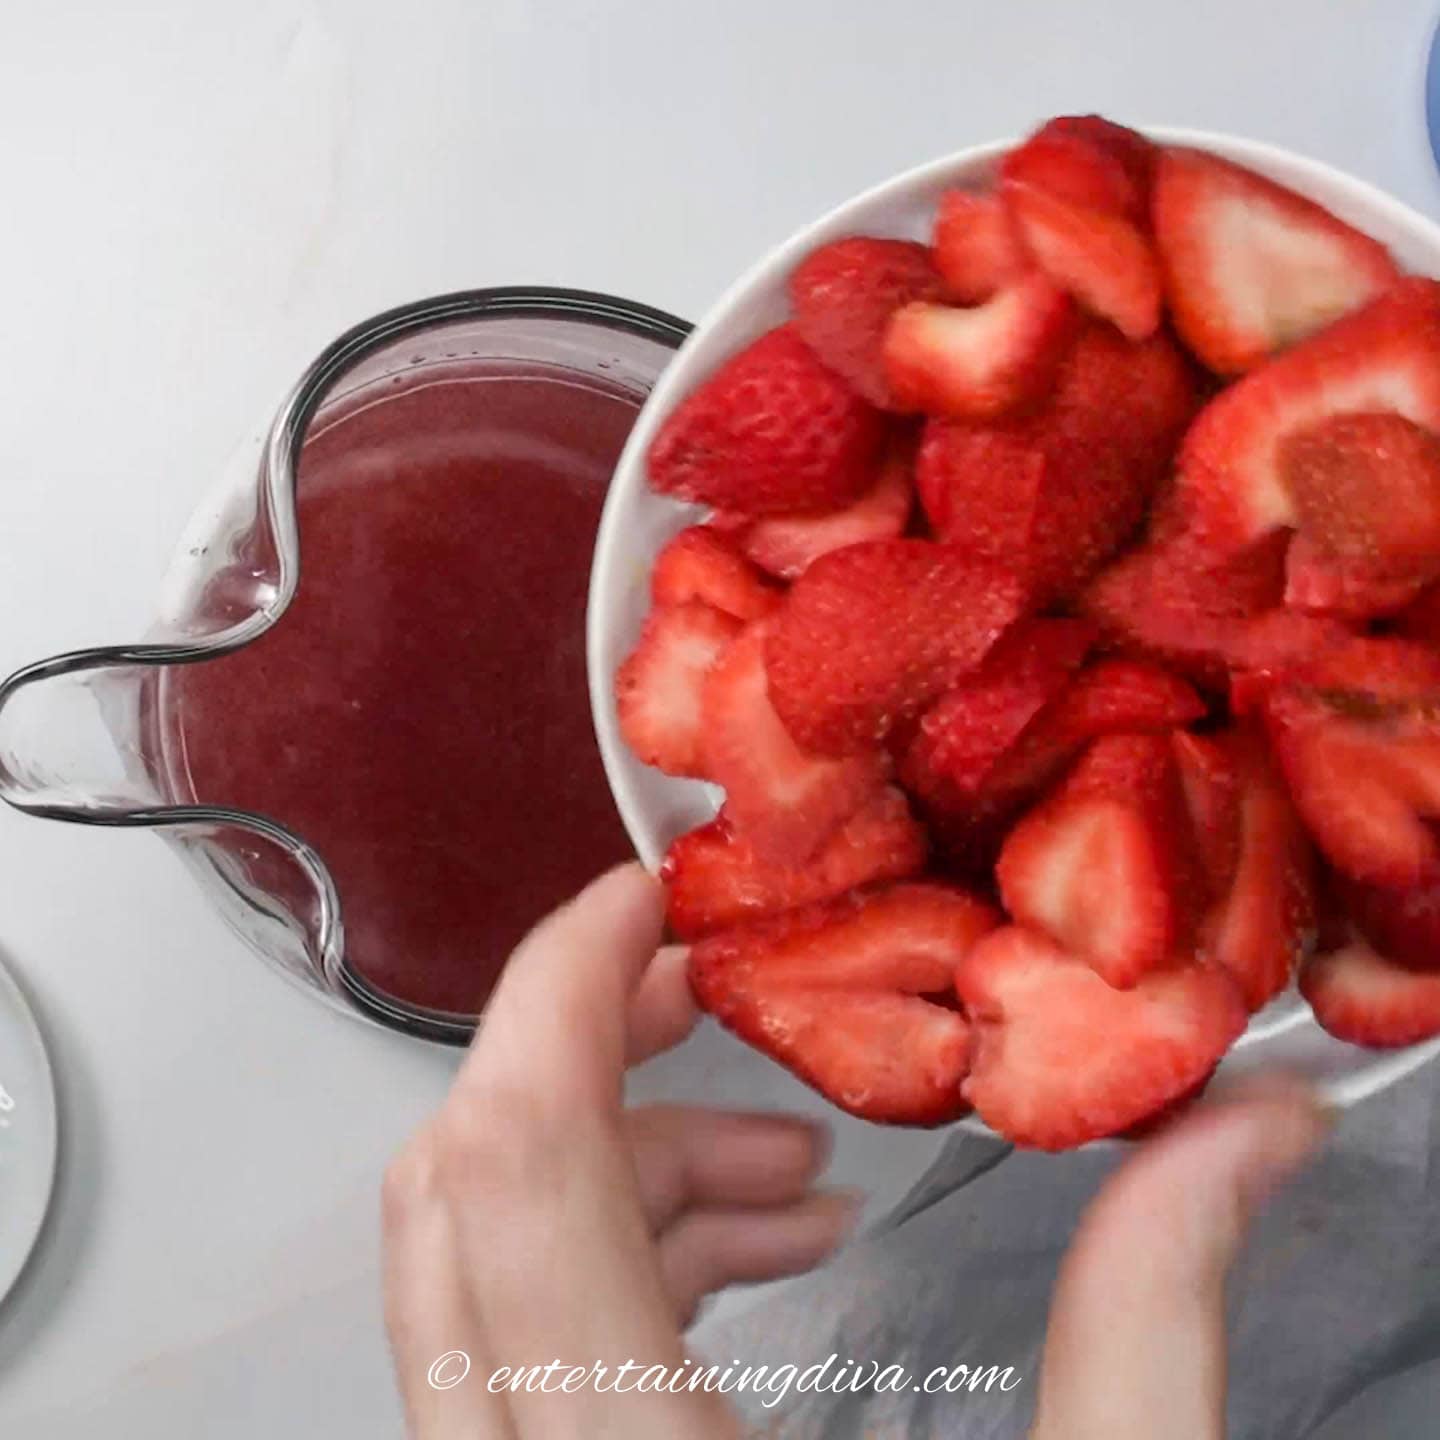 Plate of strawberries above a pitcher with wine and vodka mixture